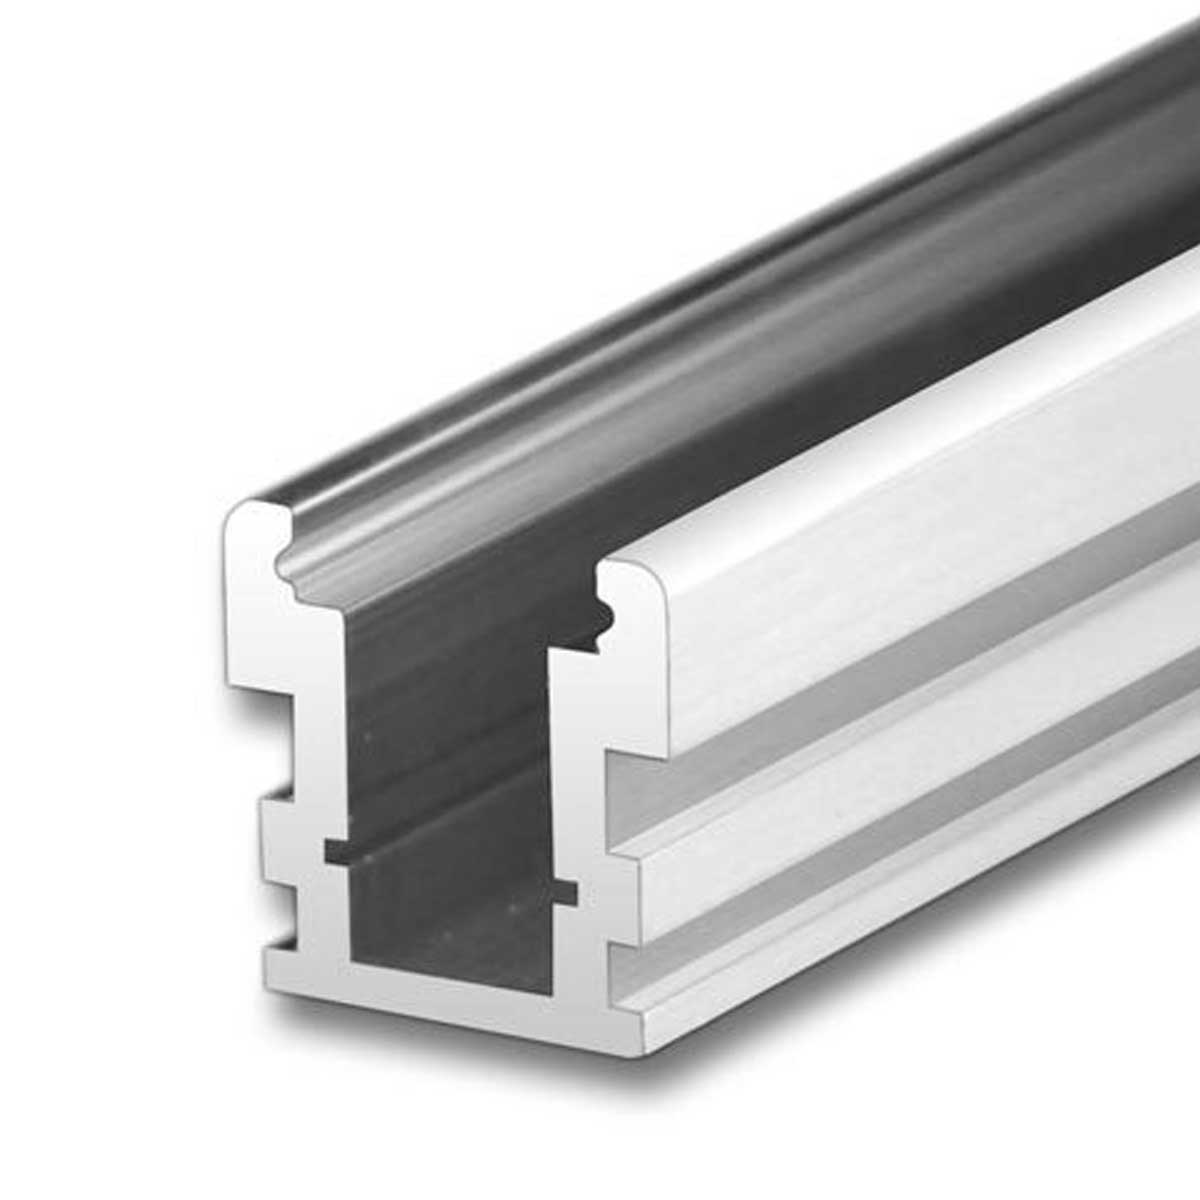 1000 Aluminium Slotted Channel Manufacturers, Suppliers in Gondia